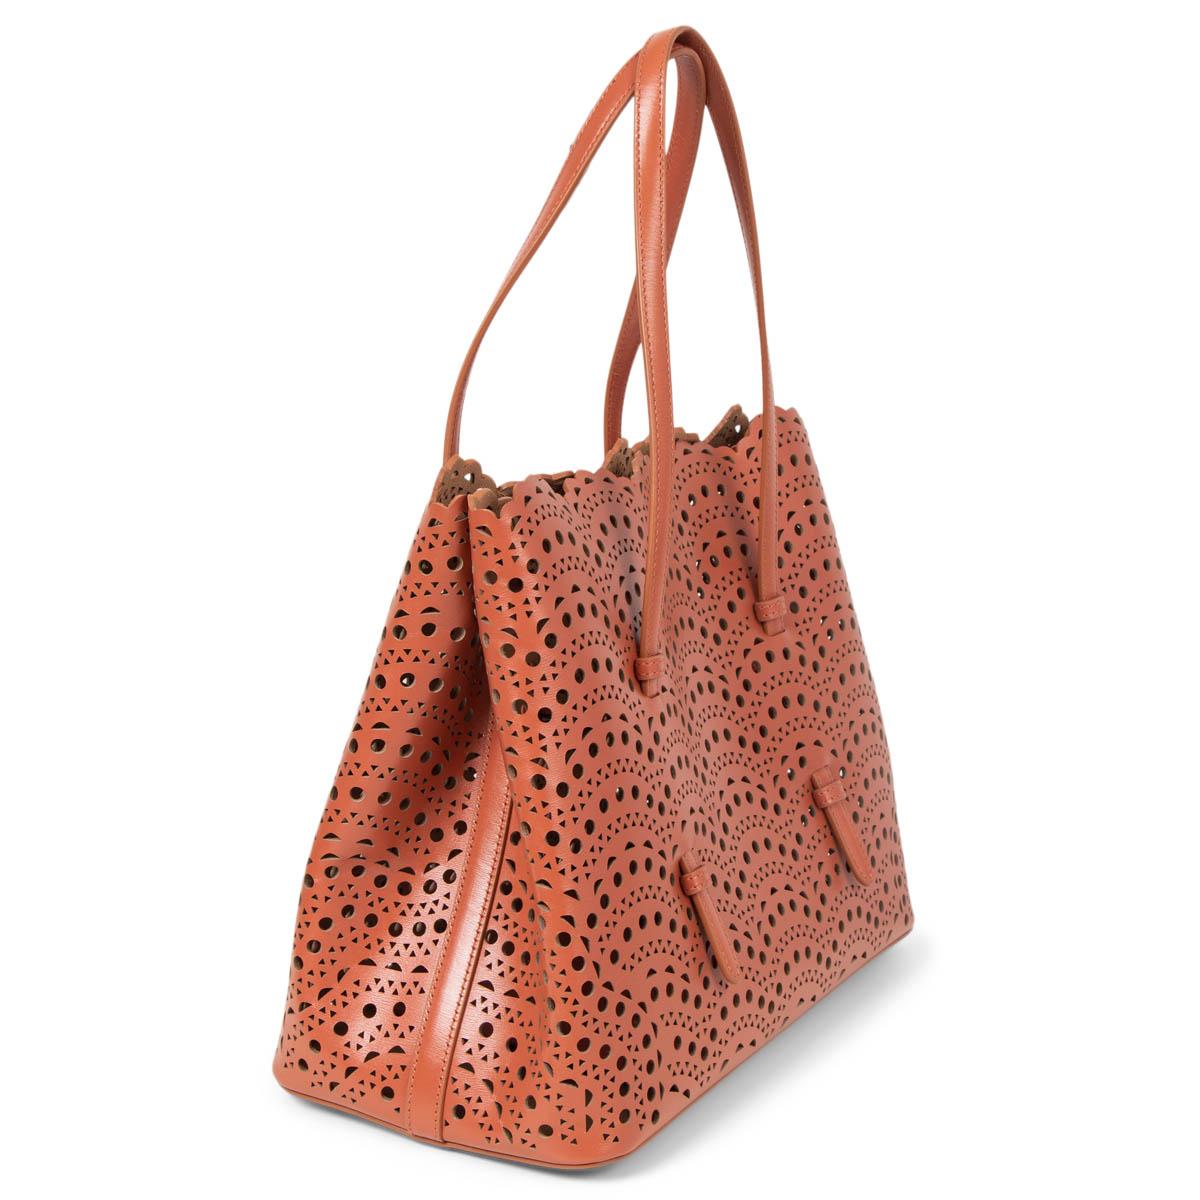 100% authentic Alaïa's Mina 32 tote bag has been crafted in Italy from smooth caramel rose leather that's laser-cut with the Maison's intricate 'Vienne Circulaire' pattern. Opens with a snap-fastening gusseted sides that expand. Comes with a